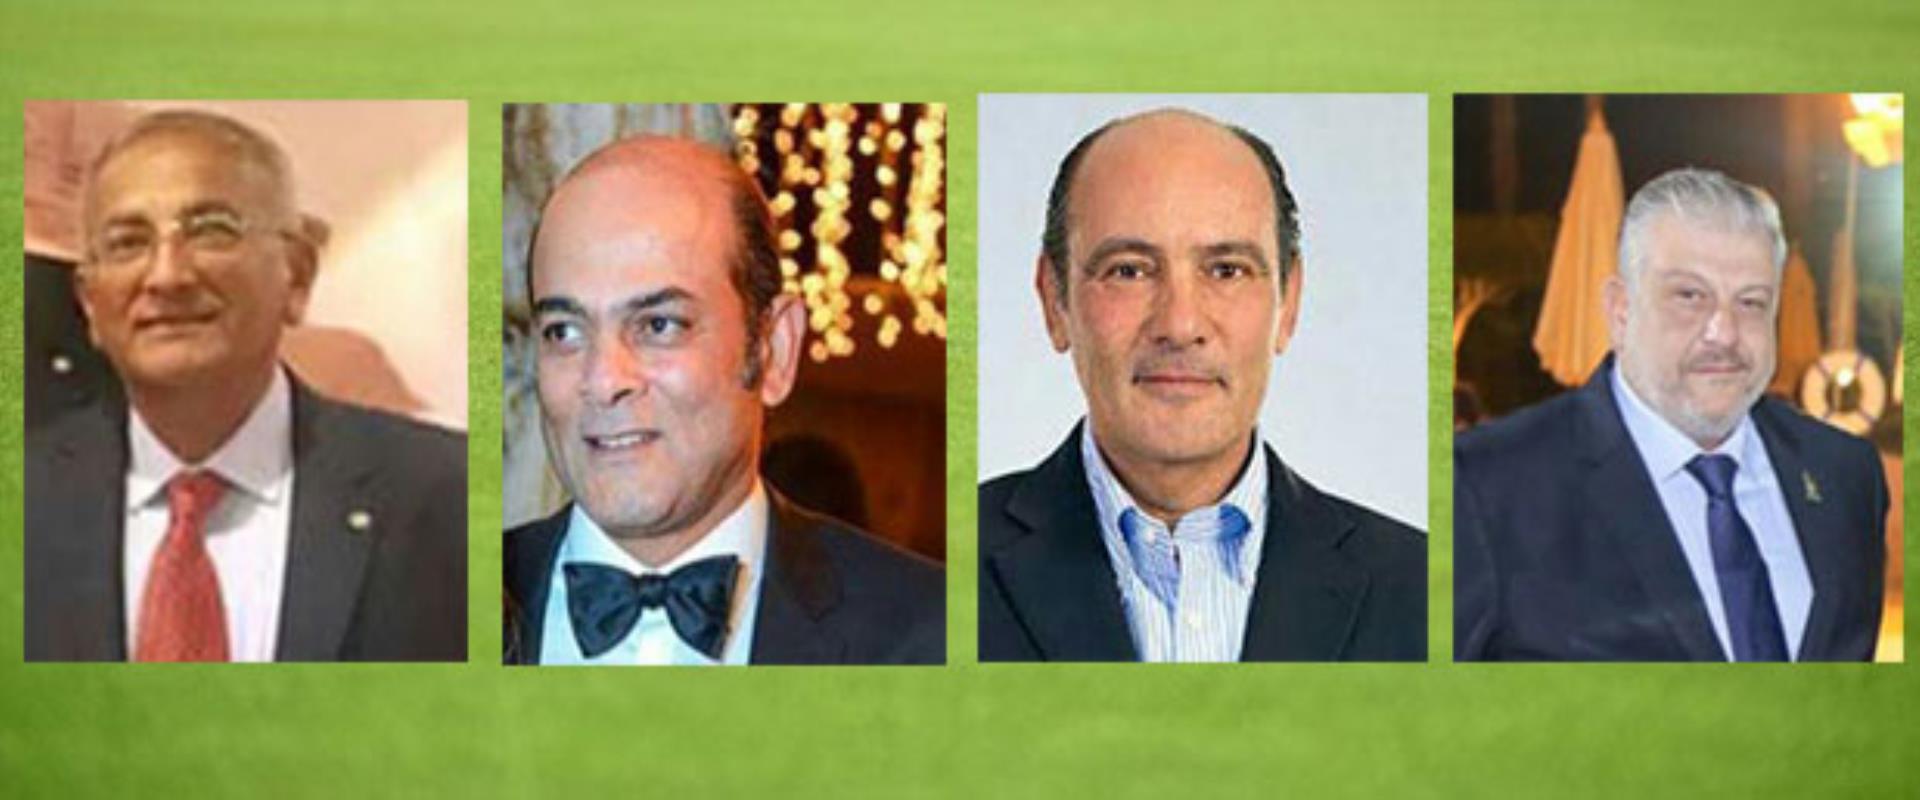 Wahib, Serafi, Agamia and Atallah new members of the Egyptian Golf Federation - Olympic Committee adopts the resolutions of the General Assembly